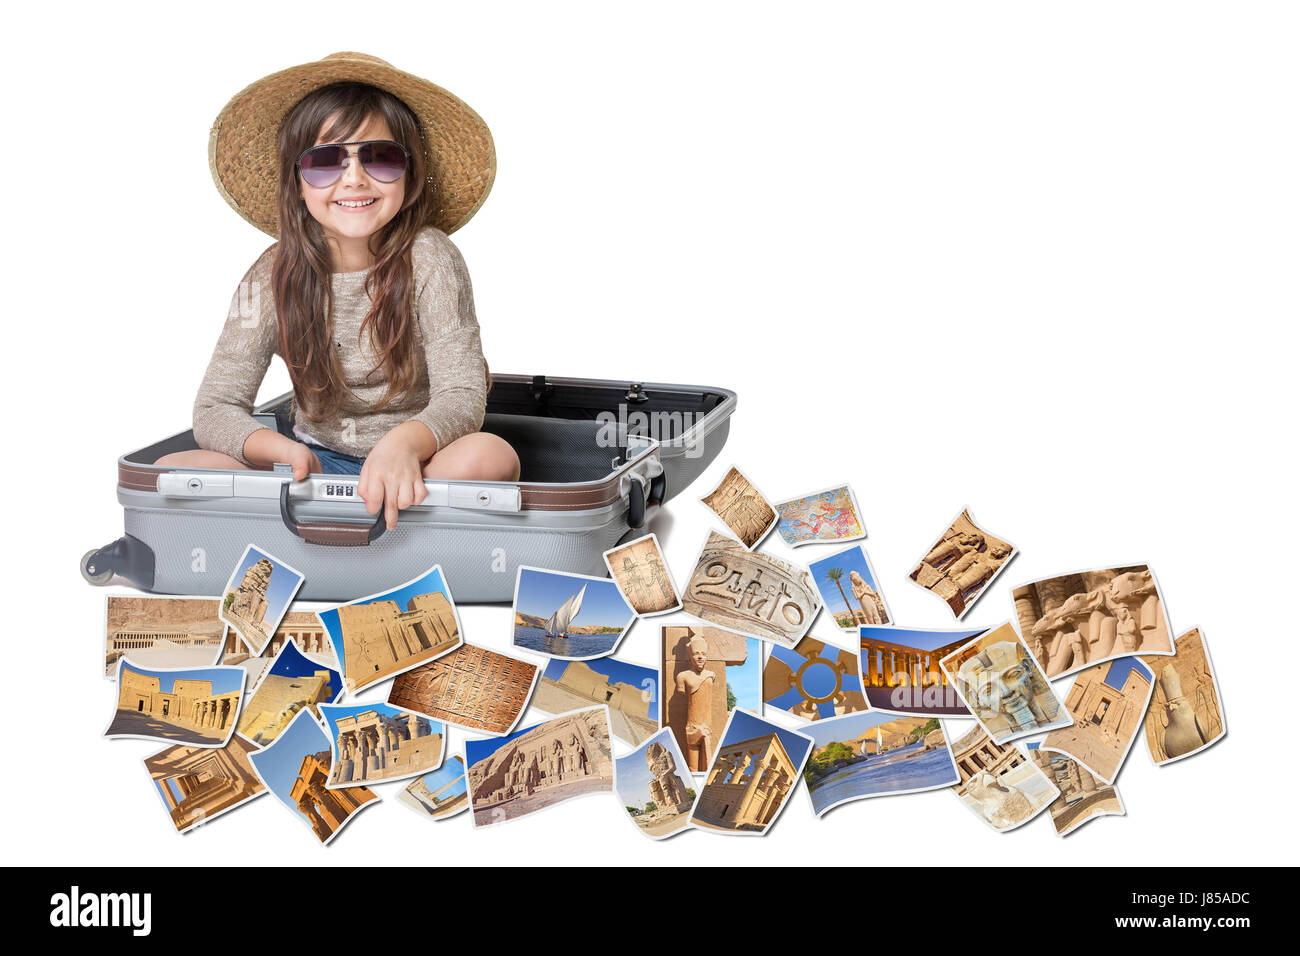 Long haired little girl with straw hat is sitting in a open suitcase. Photos of the sights of Egypt flies around the suitcase. All is on the white bac Stock Photo